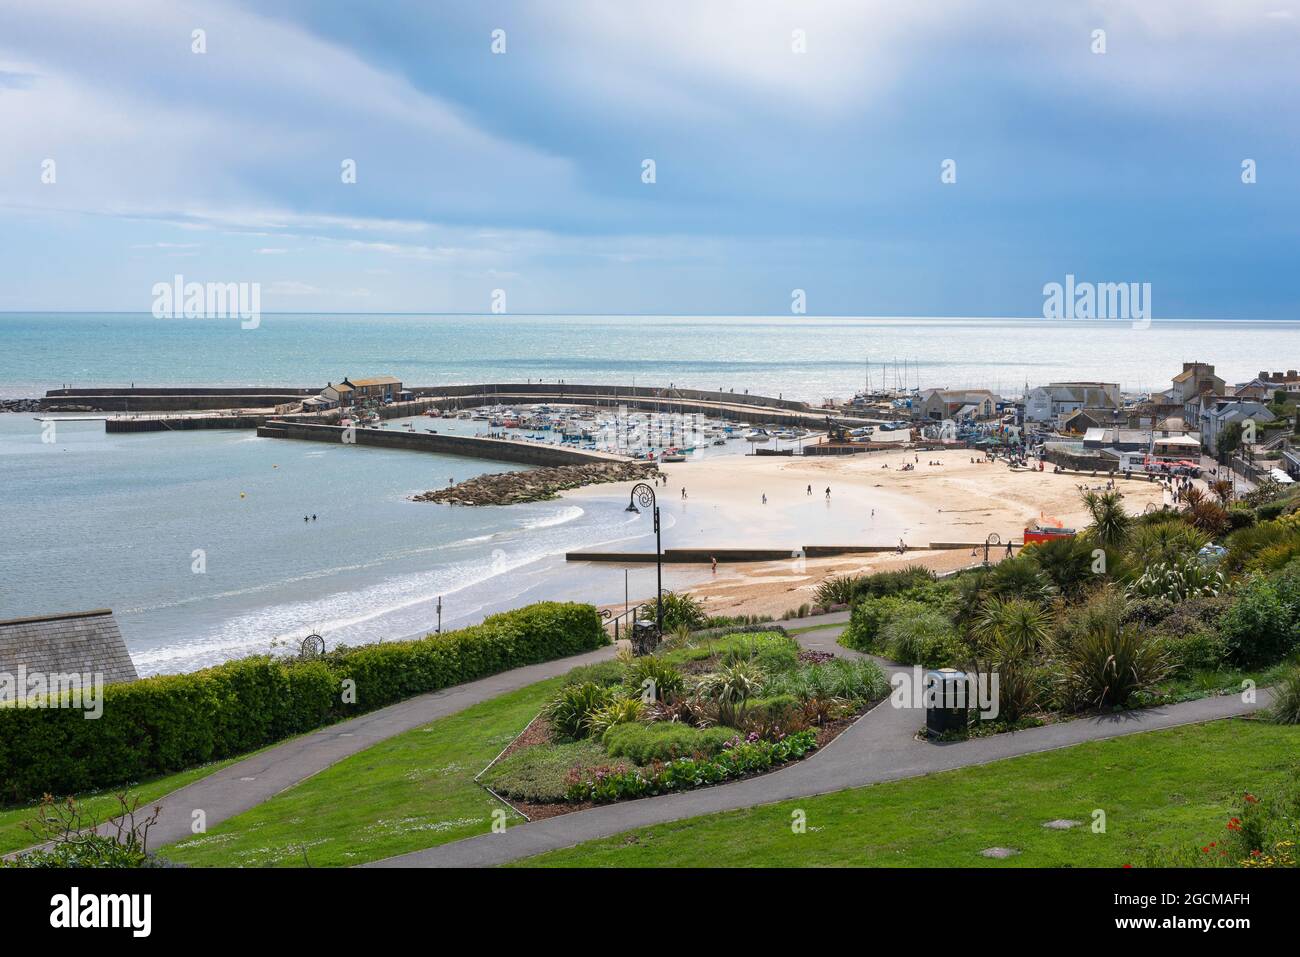 Lyme Regis, view from within the Langmoor And Lister Gardens of Lyme Regis beach with the famous Cob wall visible in the distance, Dorset, England, UK Stock Photo